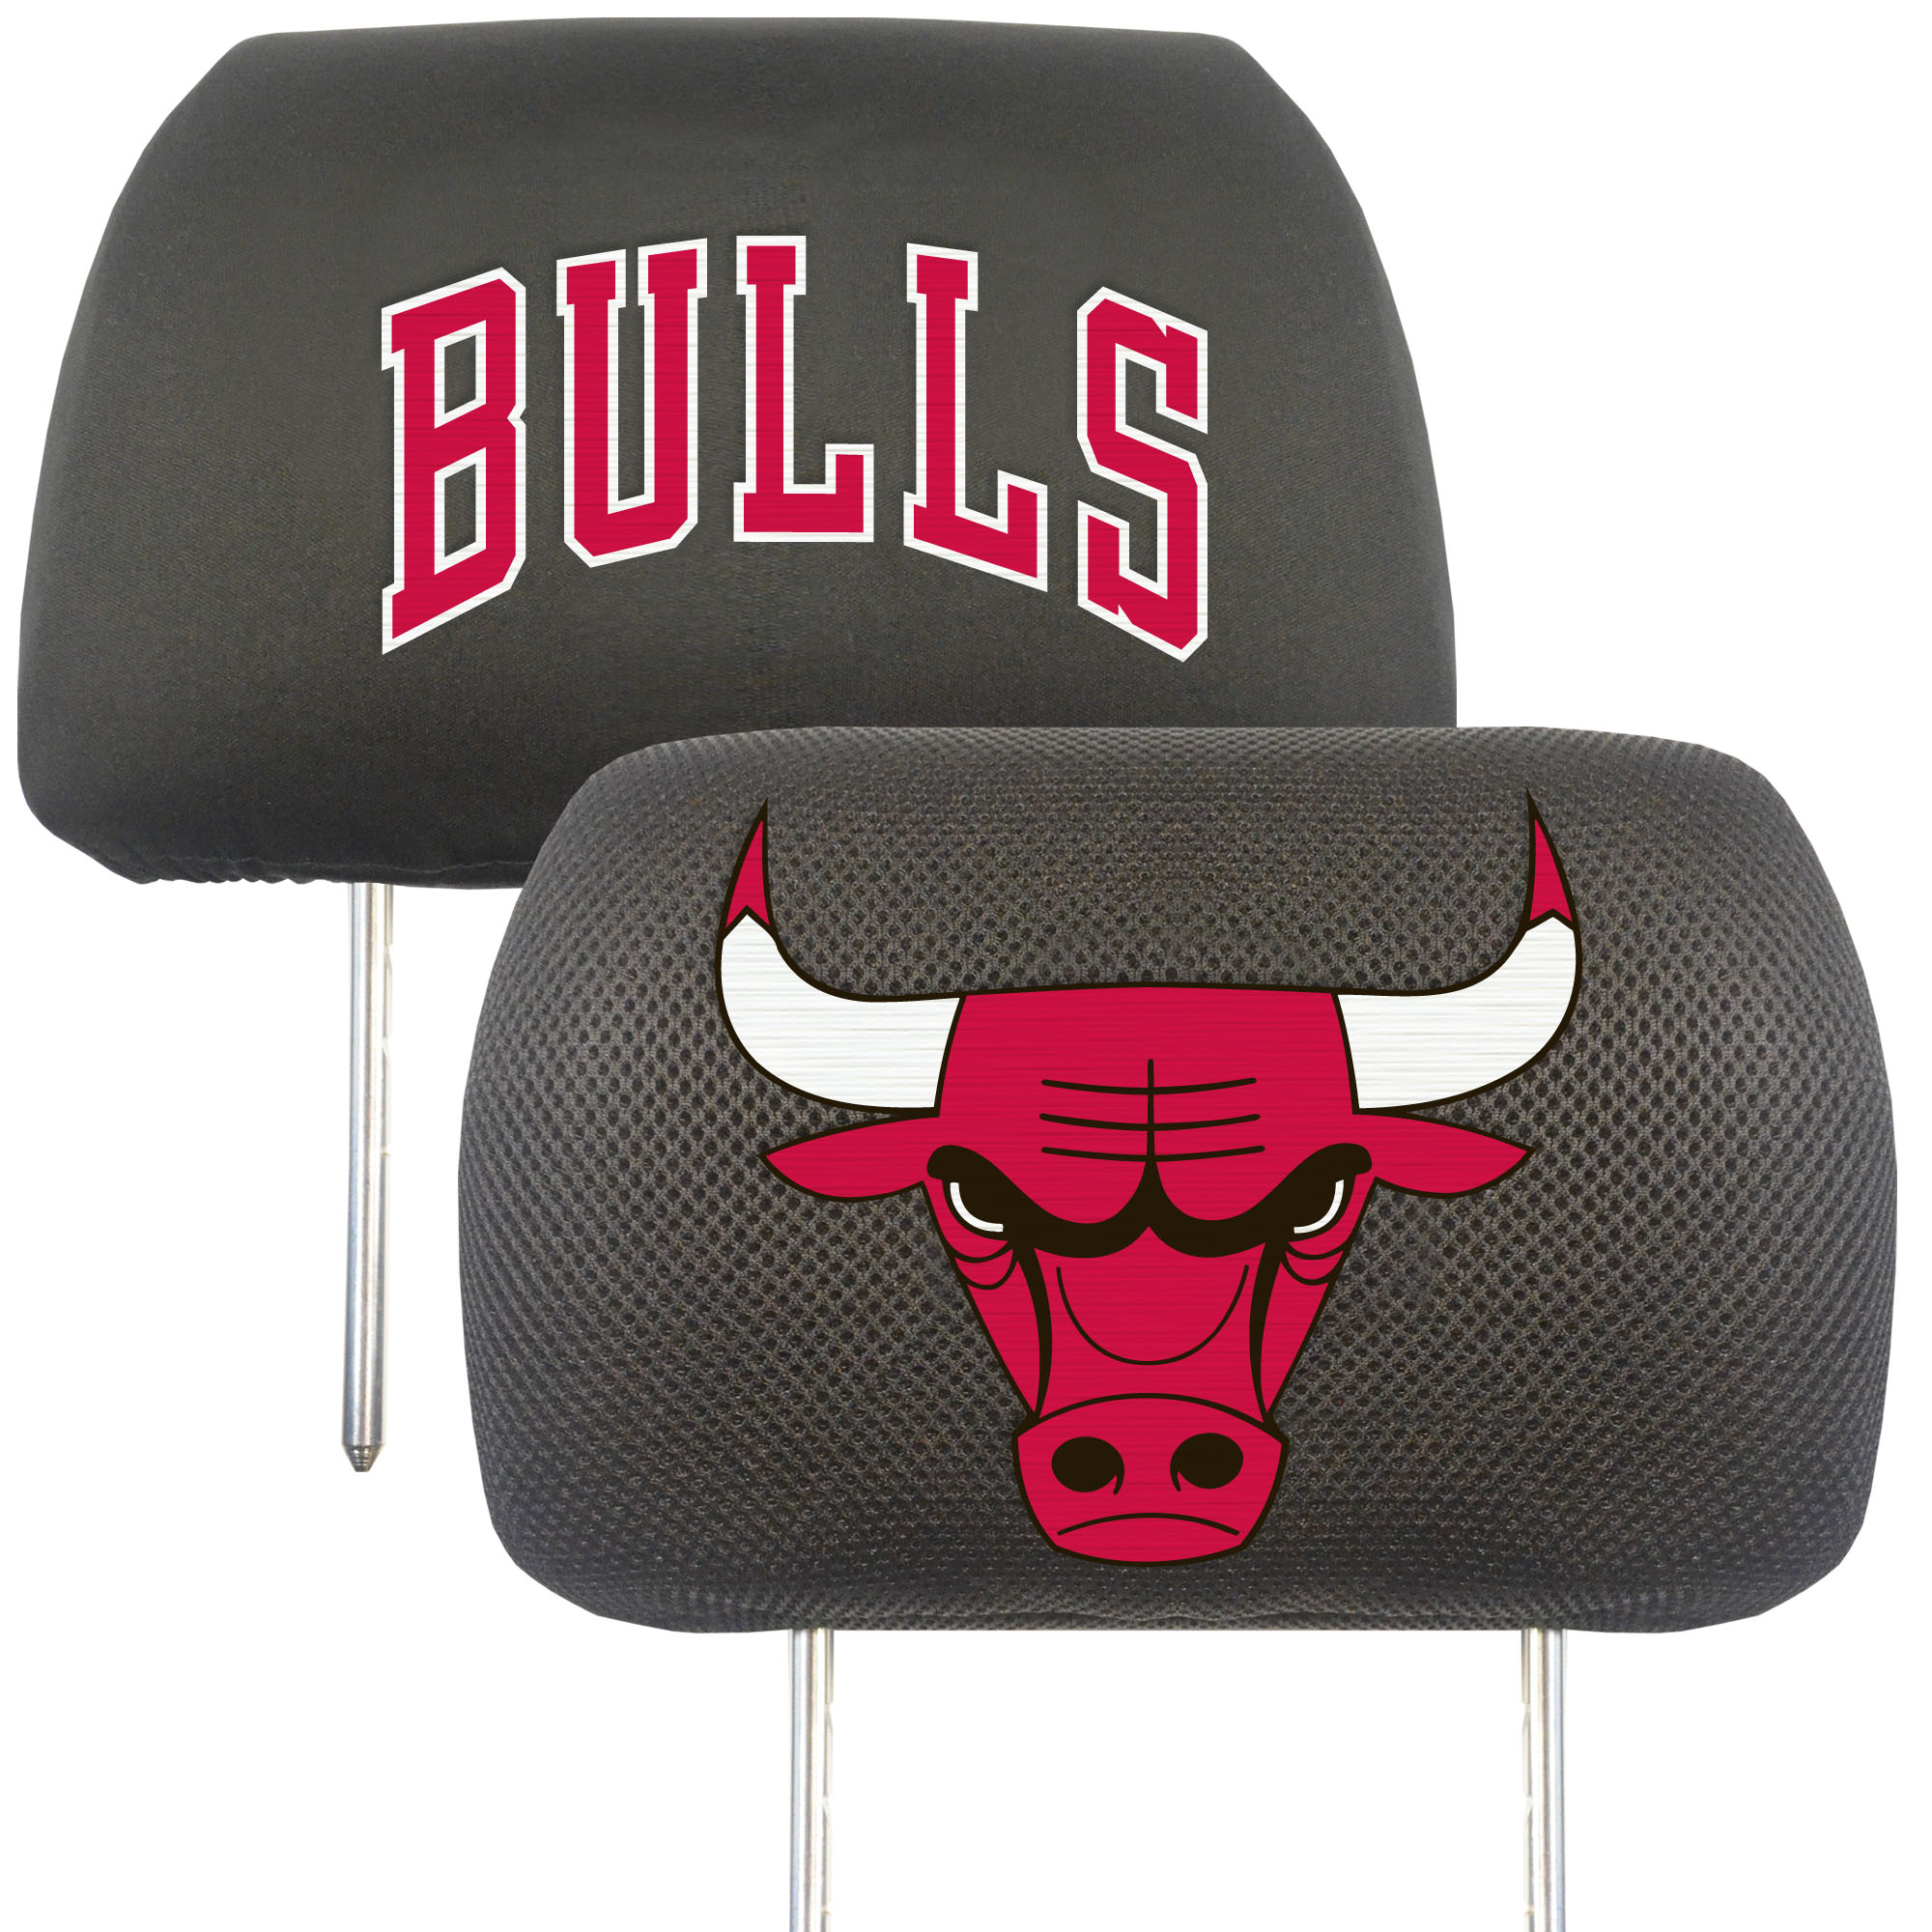 Chicago Bulls Headrest Covers FanMats Special Order